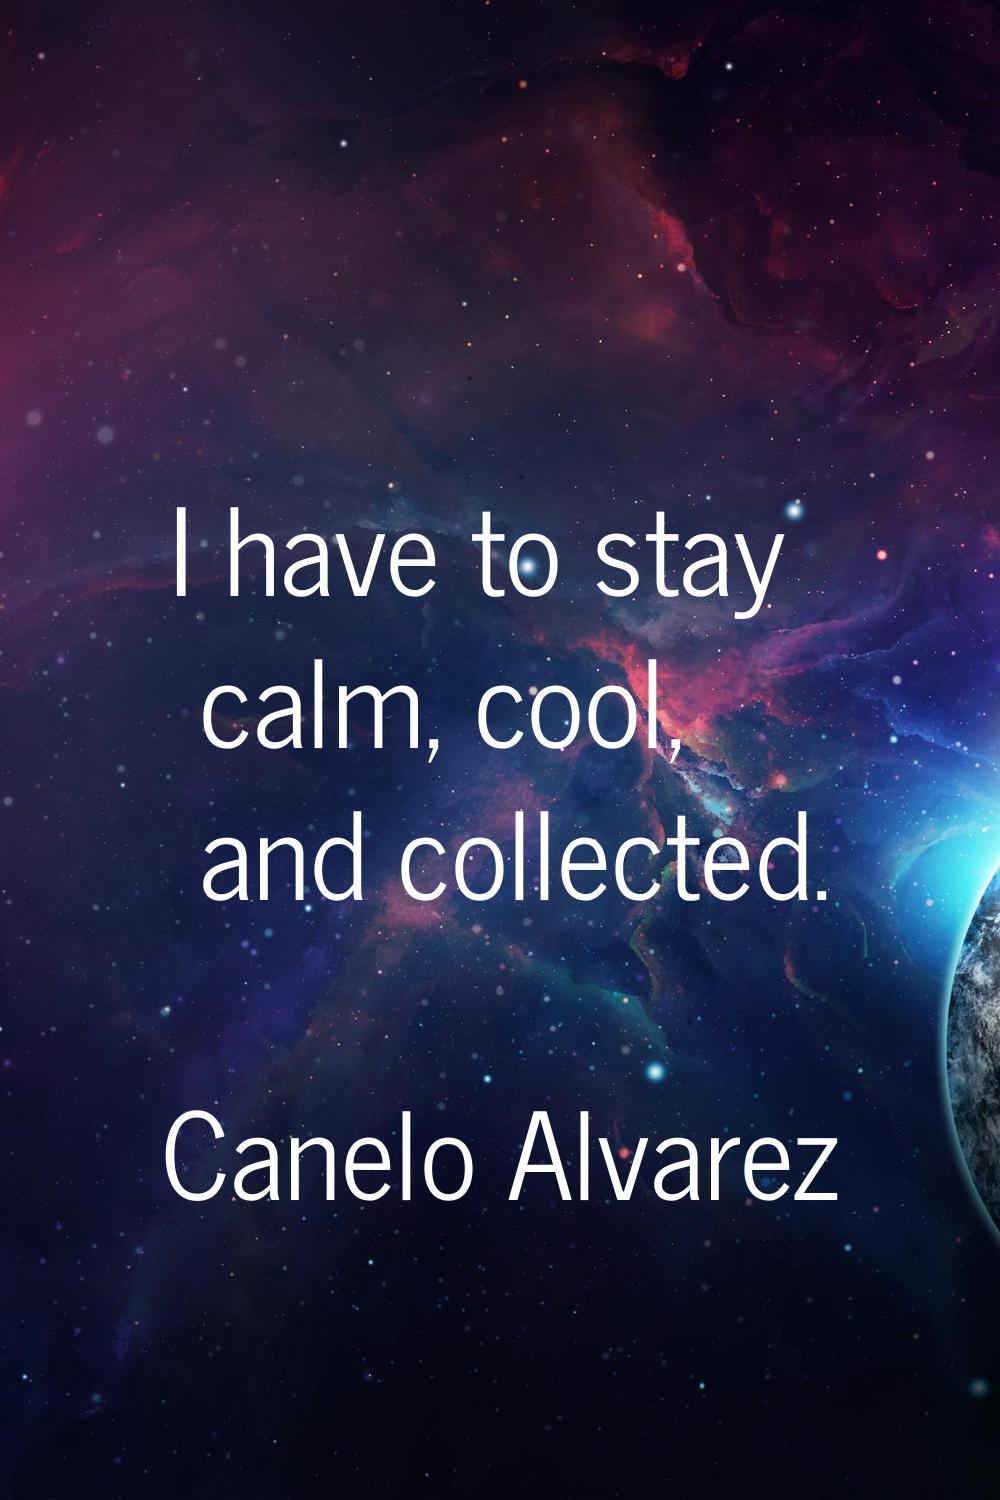 I have to stay calm, cool, and collected.